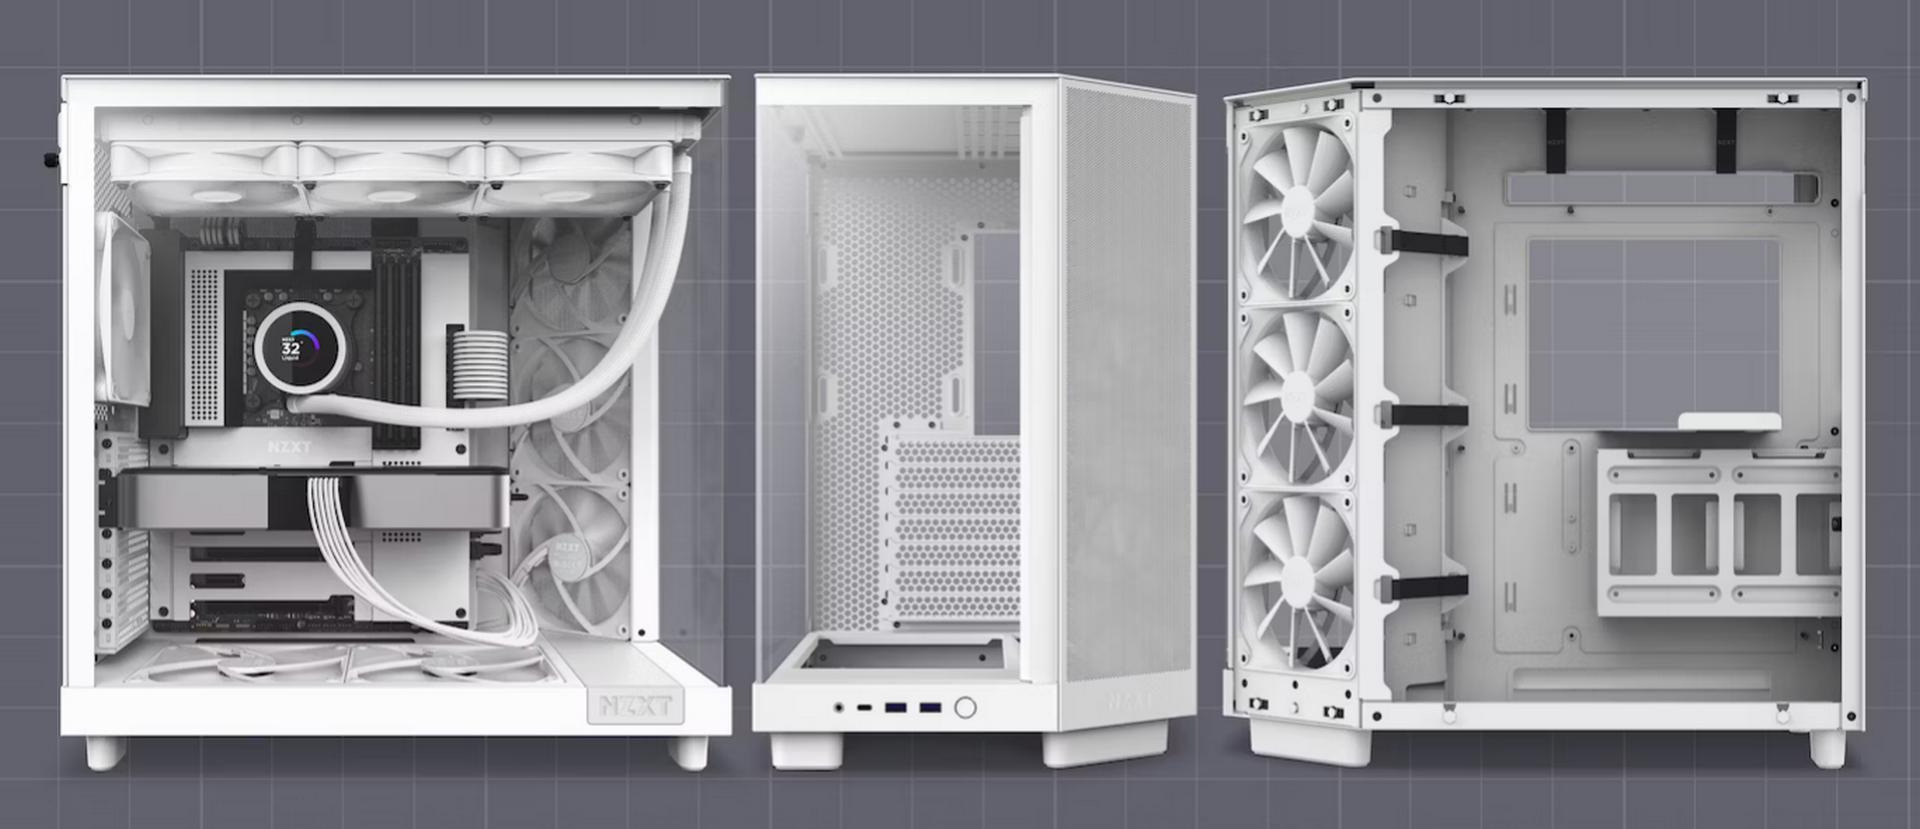 NZXT H6 Flow is a compact dual-chamber chassis packing a punch